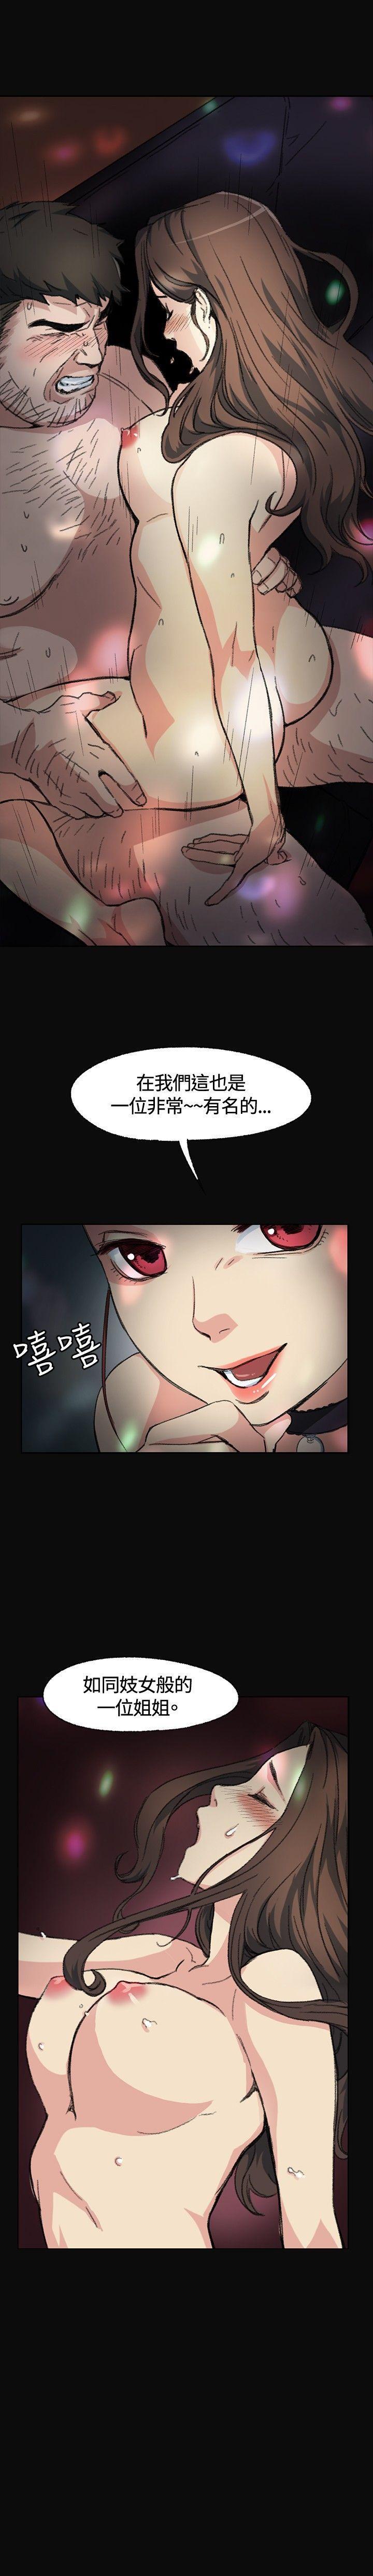 Virgin 偶然 1-53 Passion - Page 9